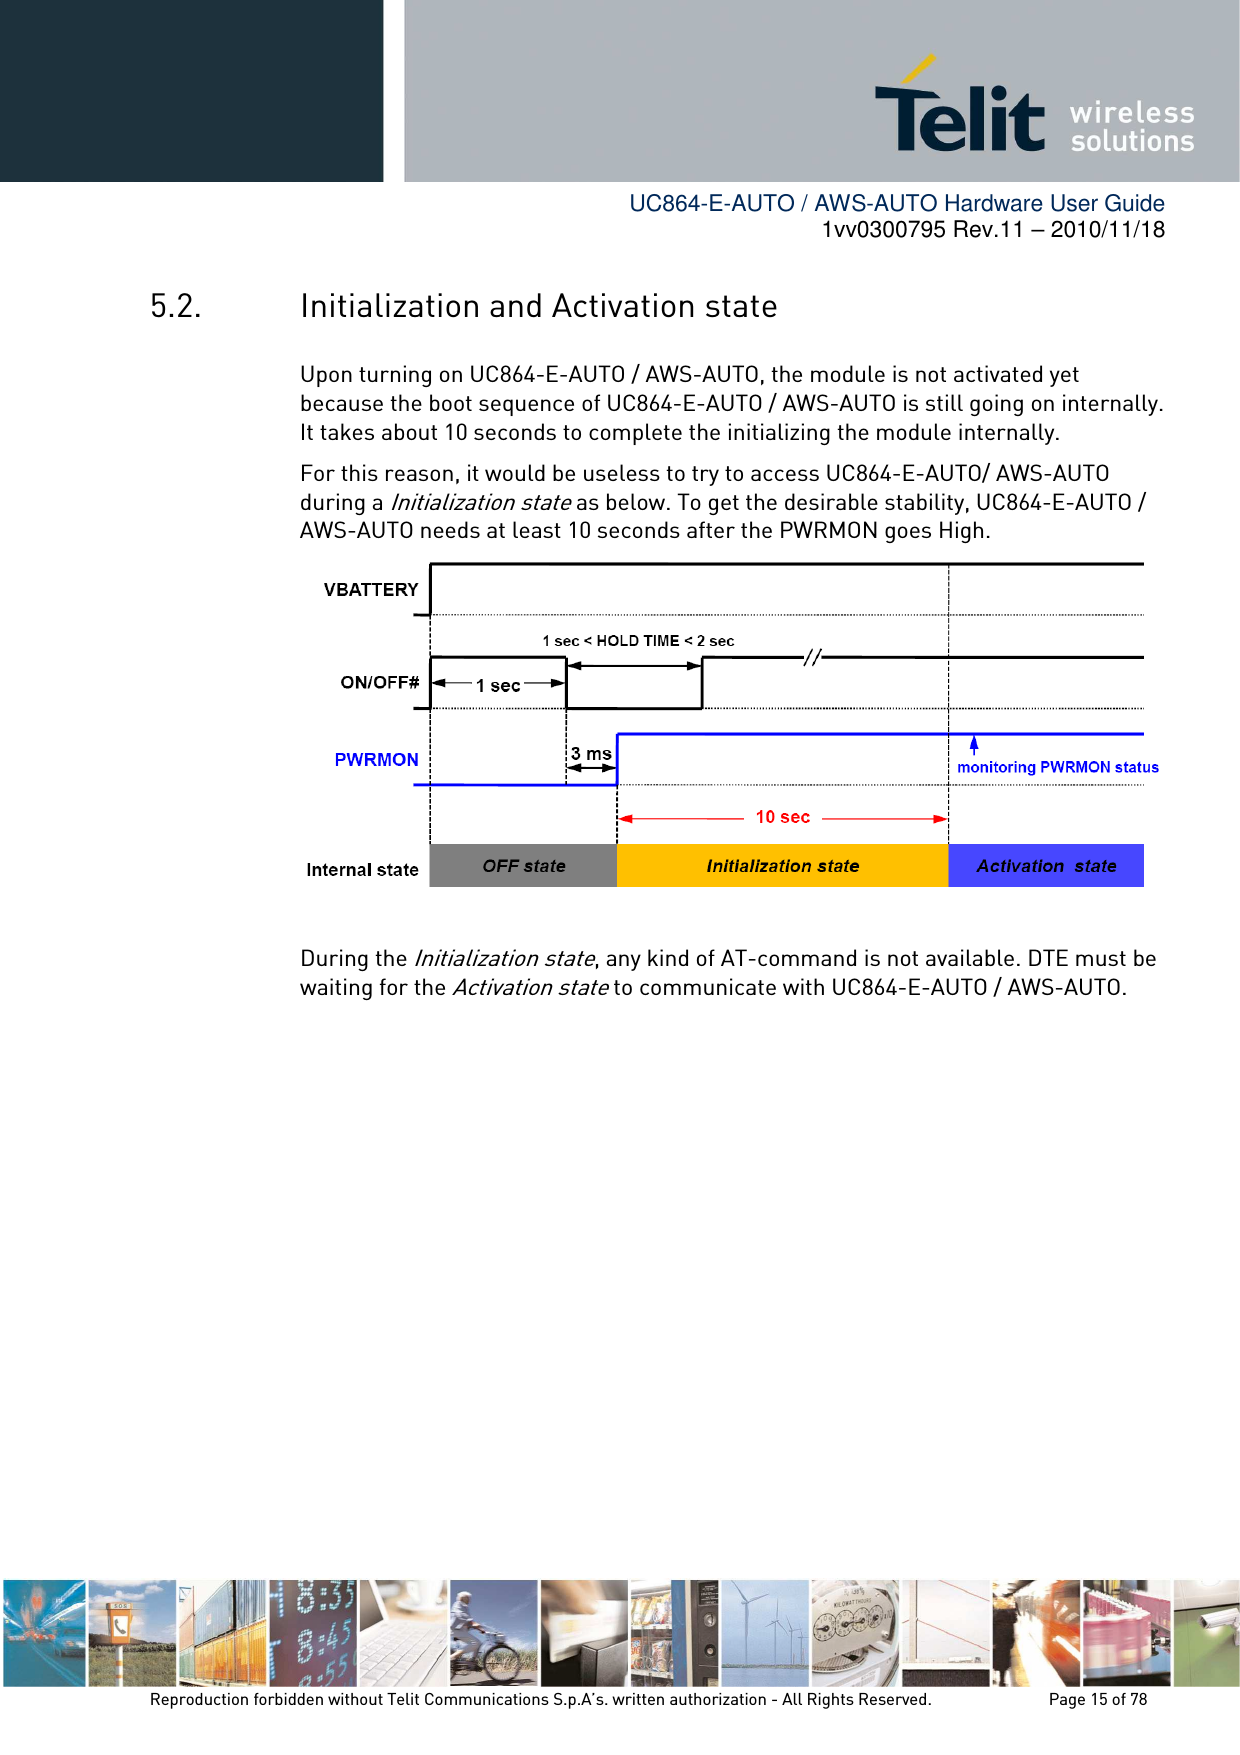        UC864-E-AUTO / AWS-AUTO Hardware User Guide 1vv0300795 Rev.11 – 2010/11/18     Reproduction forbidden without Telit Communications S.p.A’s. written authorization - All Rights Reserved.    Page 15 of 78  5.2. Initialization and Activation state Upon turning on UC864-E-AUTO / AWS-AUTO, the module is not activated yet because the boot sequence of UC864-E-AUTO / AWS-AUTO is still going on internally. It takes about 10 seconds to complete the initializing the module internally. For this reason, it would be useless to try to access UC864-E-AUTO/ AWS-AUTO during a Initialization state as below. To get the desirable stability, UC864-E-AUTO / AWS-AUTO needs at least 10 seconds after the PWRMON goes High.   During the Initialization state, any kind of AT-command is not available. DTE must be waiting for the Activation state to communicate with UC864-E-AUTO / AWS-AUTO. 